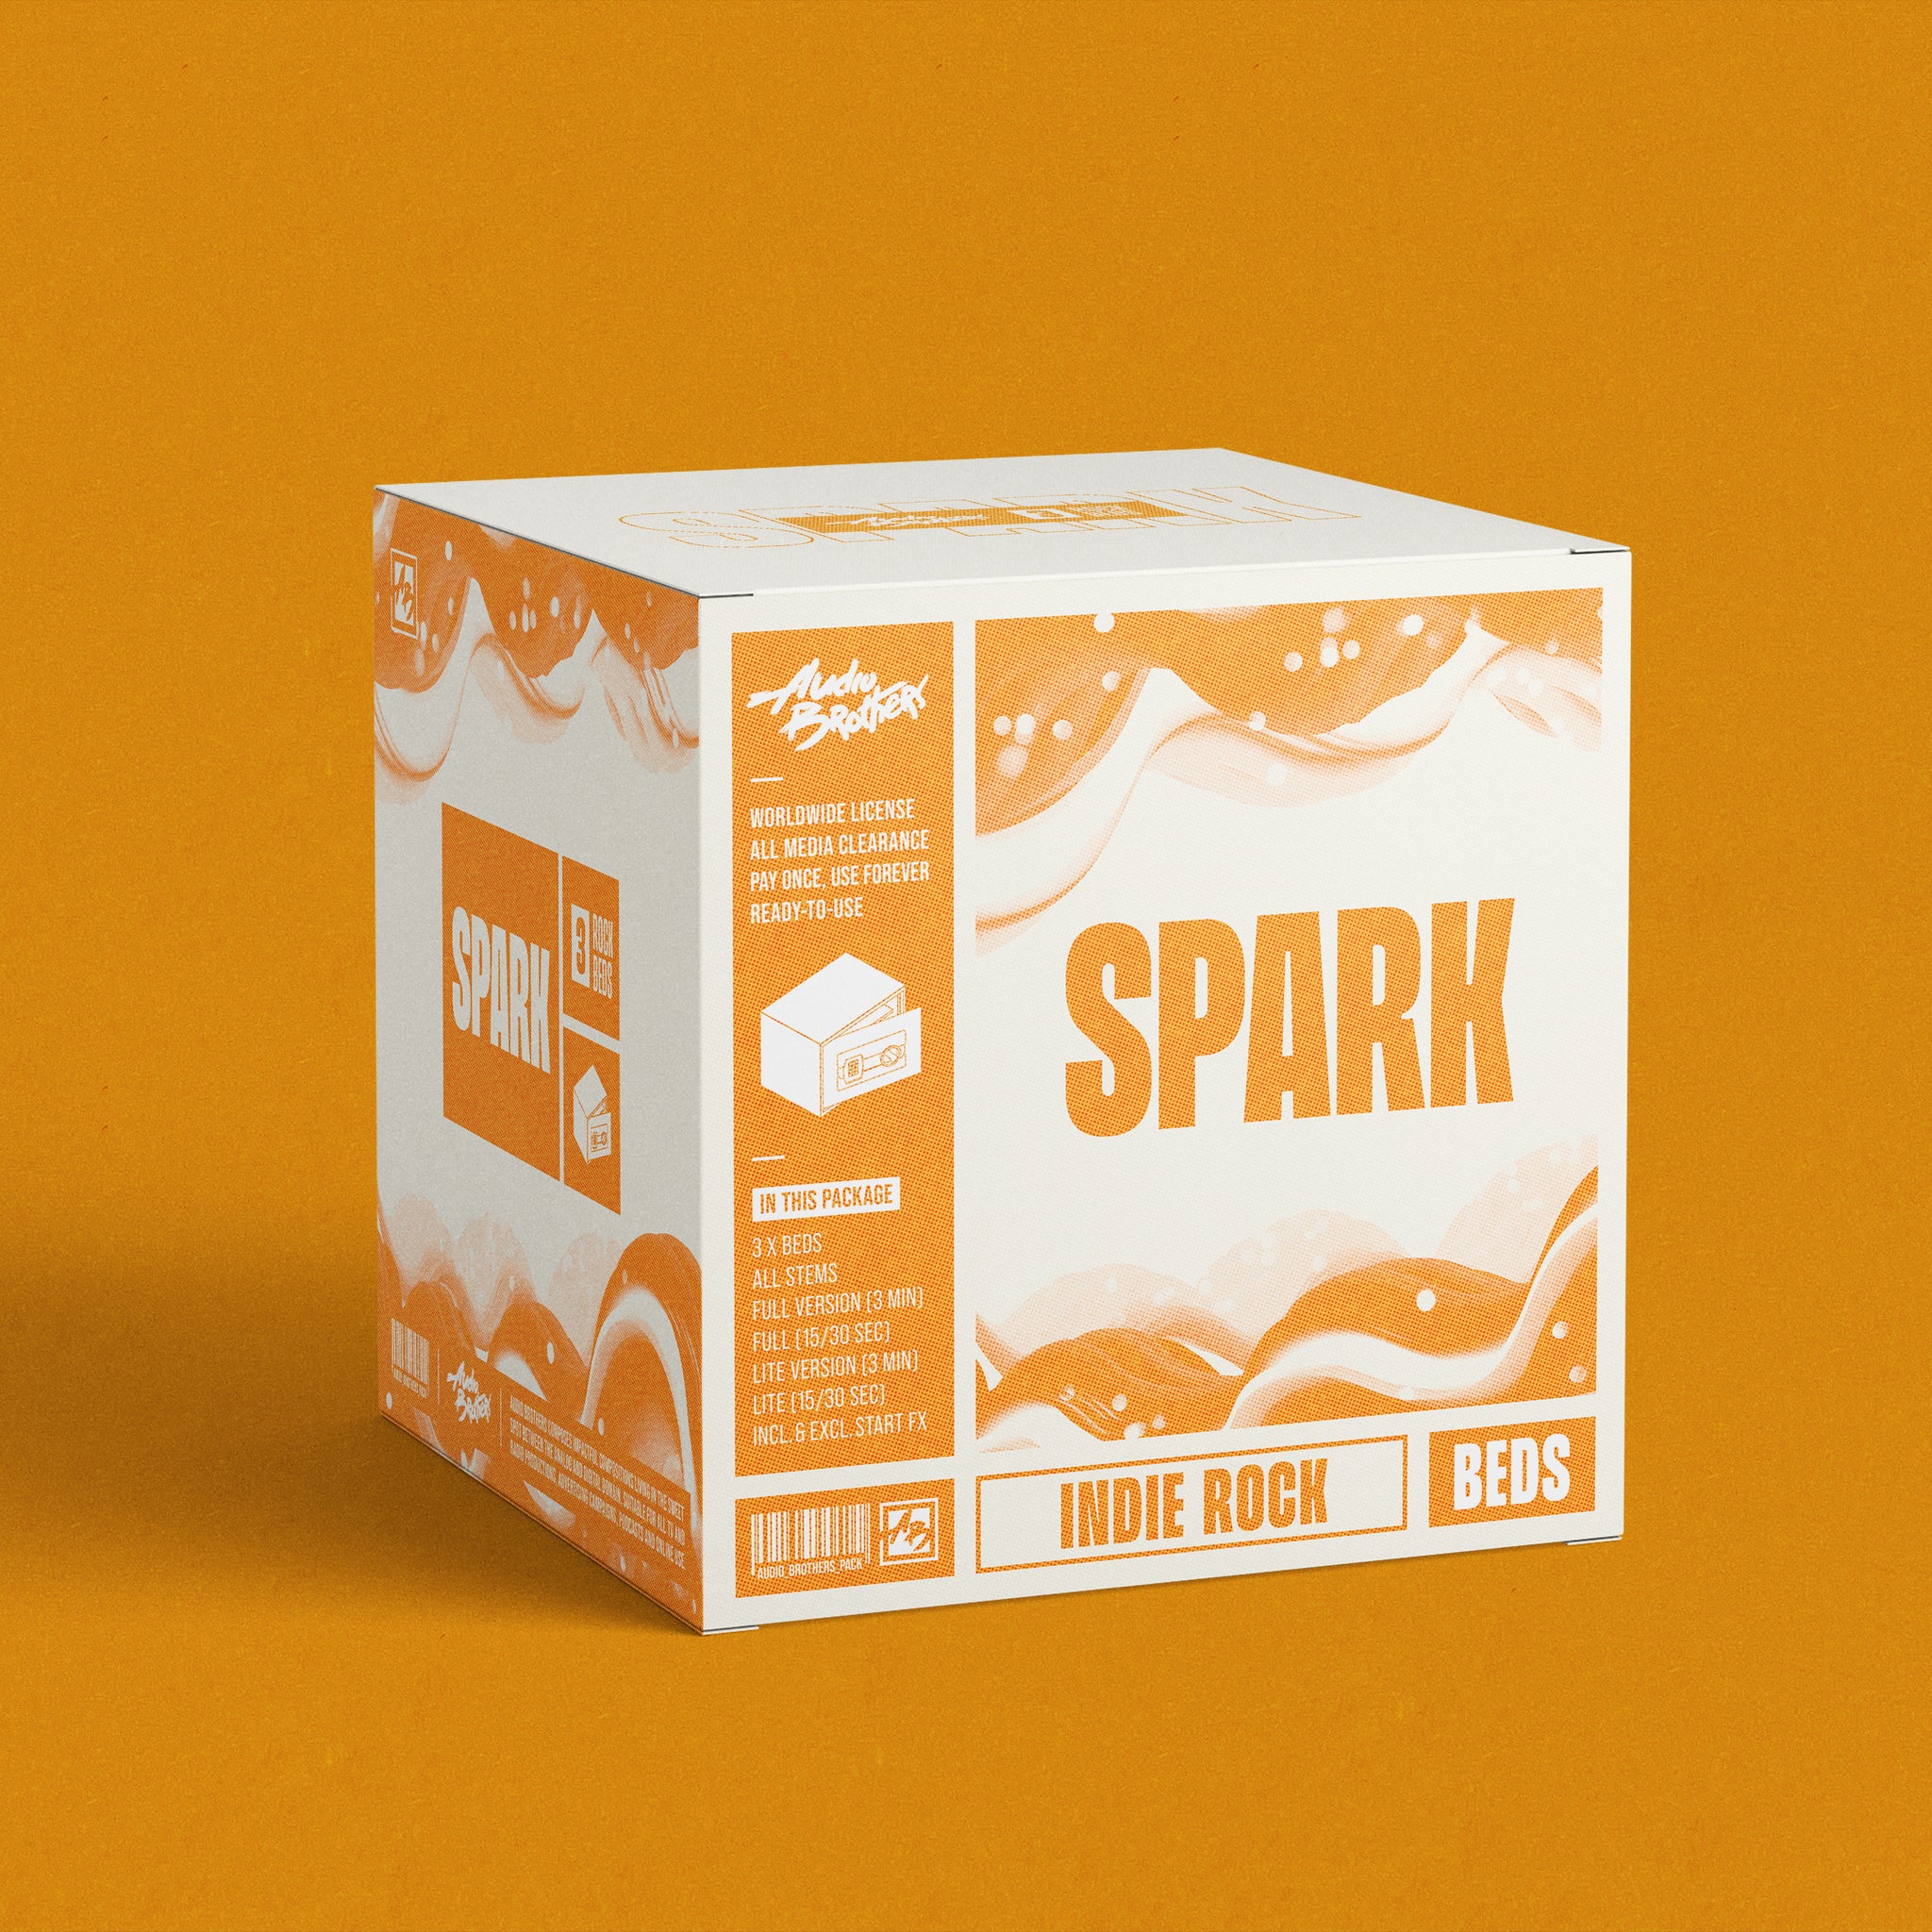 3x Music Beds (Indie Rock) - Spark